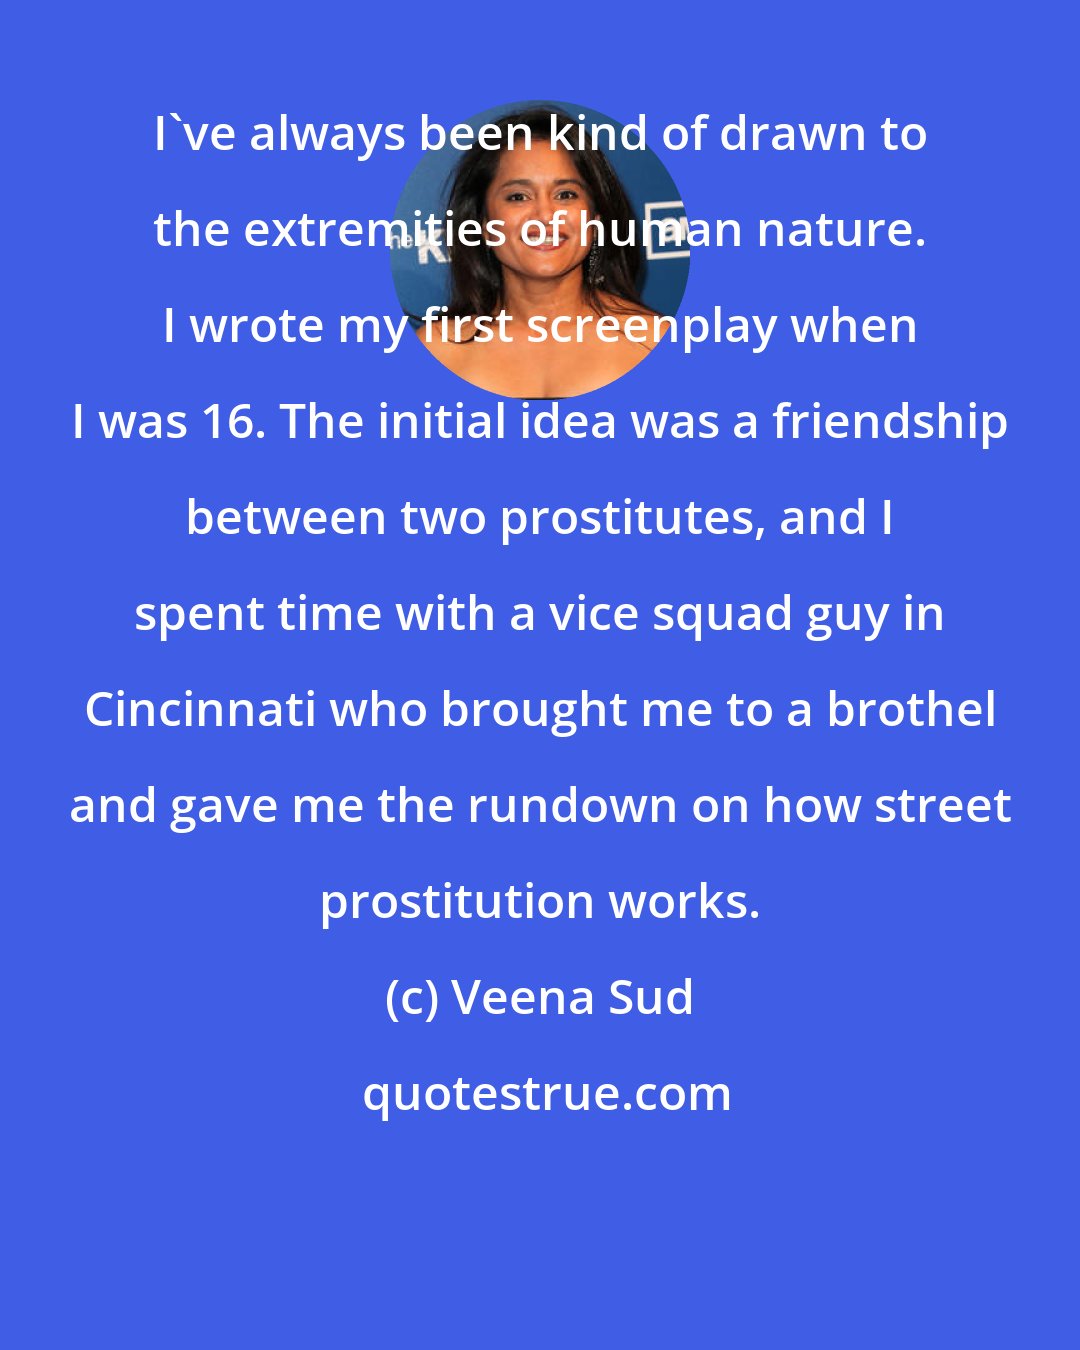 Veena Sud: I've always been kind of drawn to the extremities of human nature. I wrote my first screenplay when I was 16. The initial idea was a friendship between two prostitutes, and I spent time with a vice squad guy in Cincinnati who brought me to a brothel and gave me the rundown on how street prostitution works.